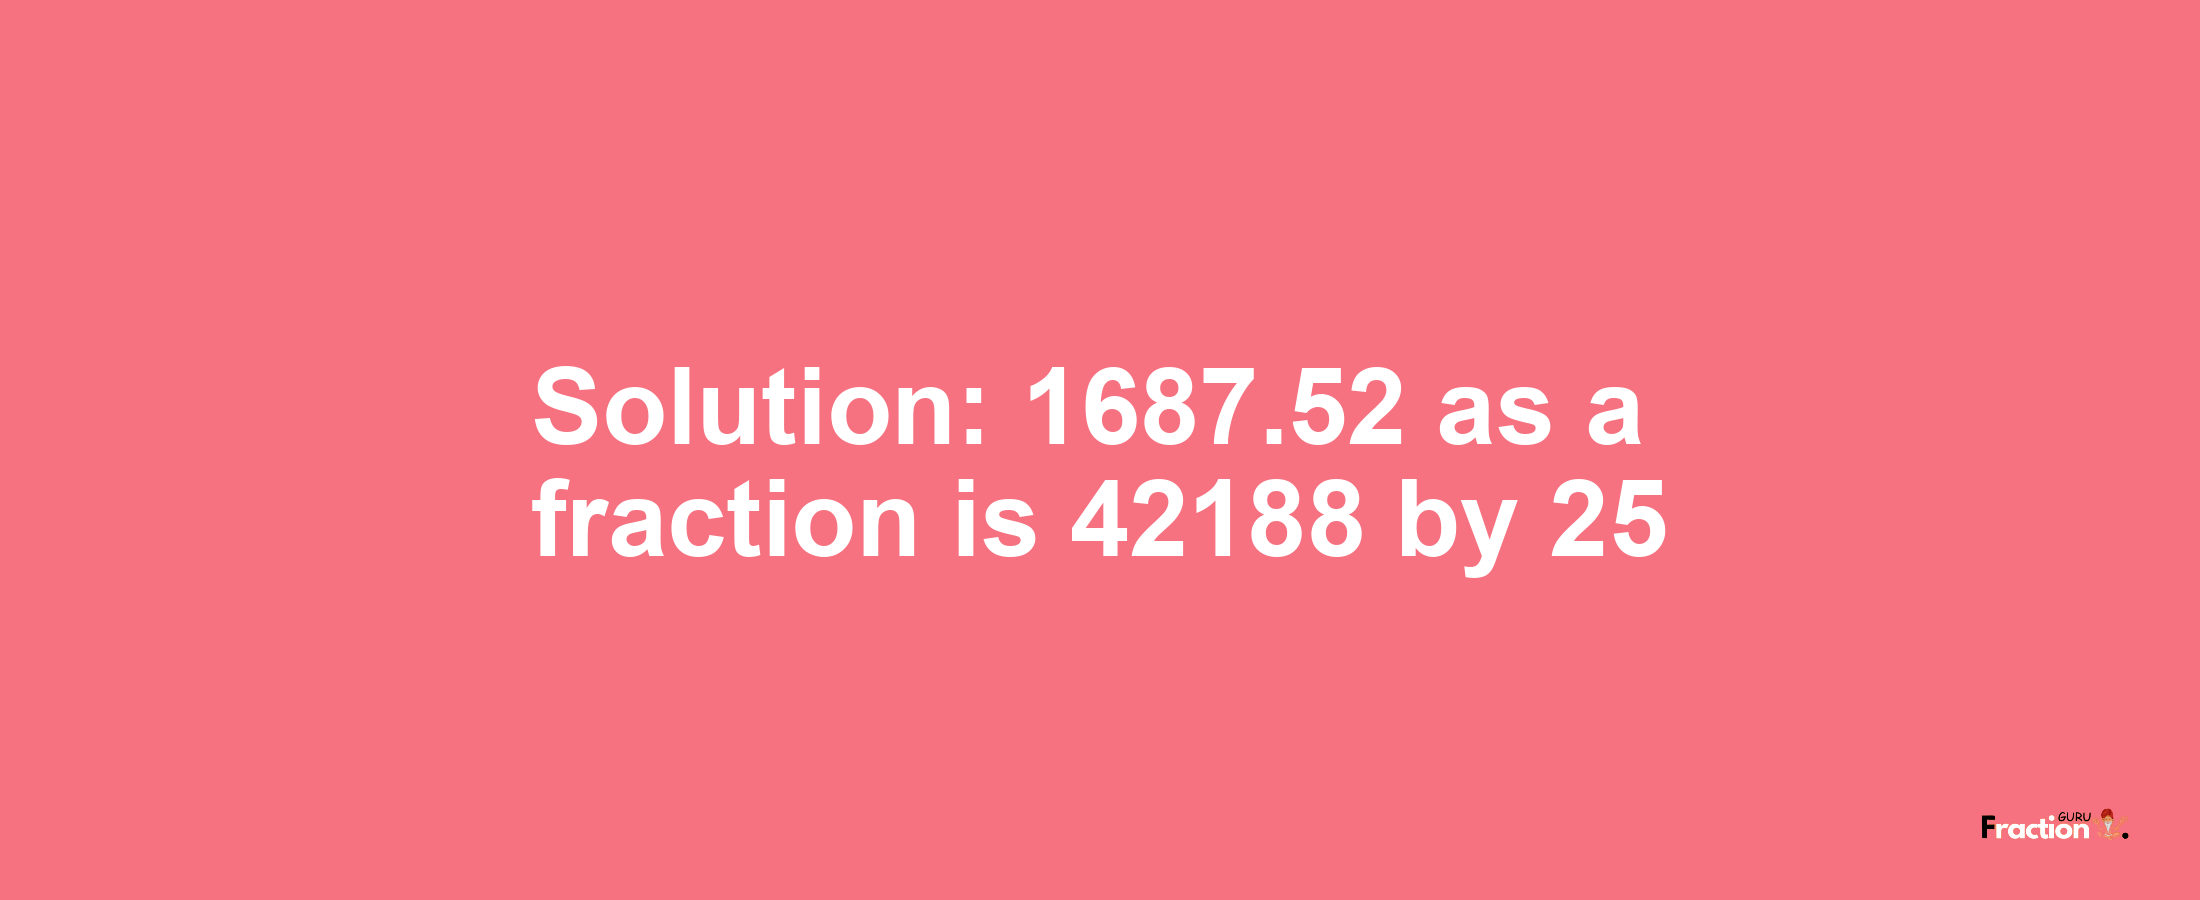 Solution:1687.52 as a fraction is 42188/25